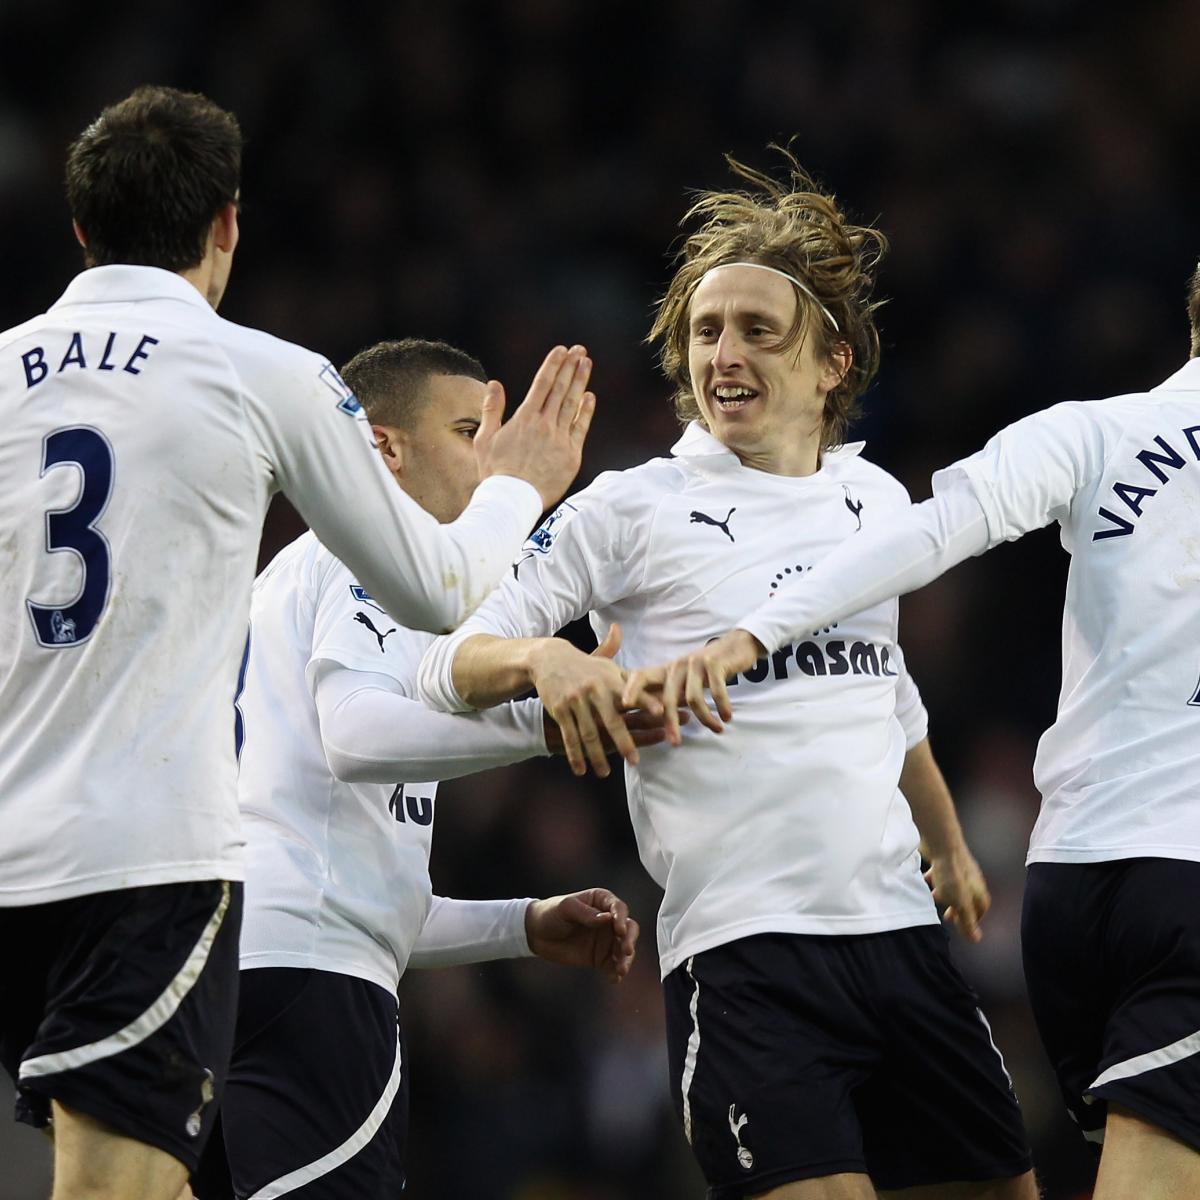 Tottenham vs Sheffield United highlights as Bale hat-trick and Son